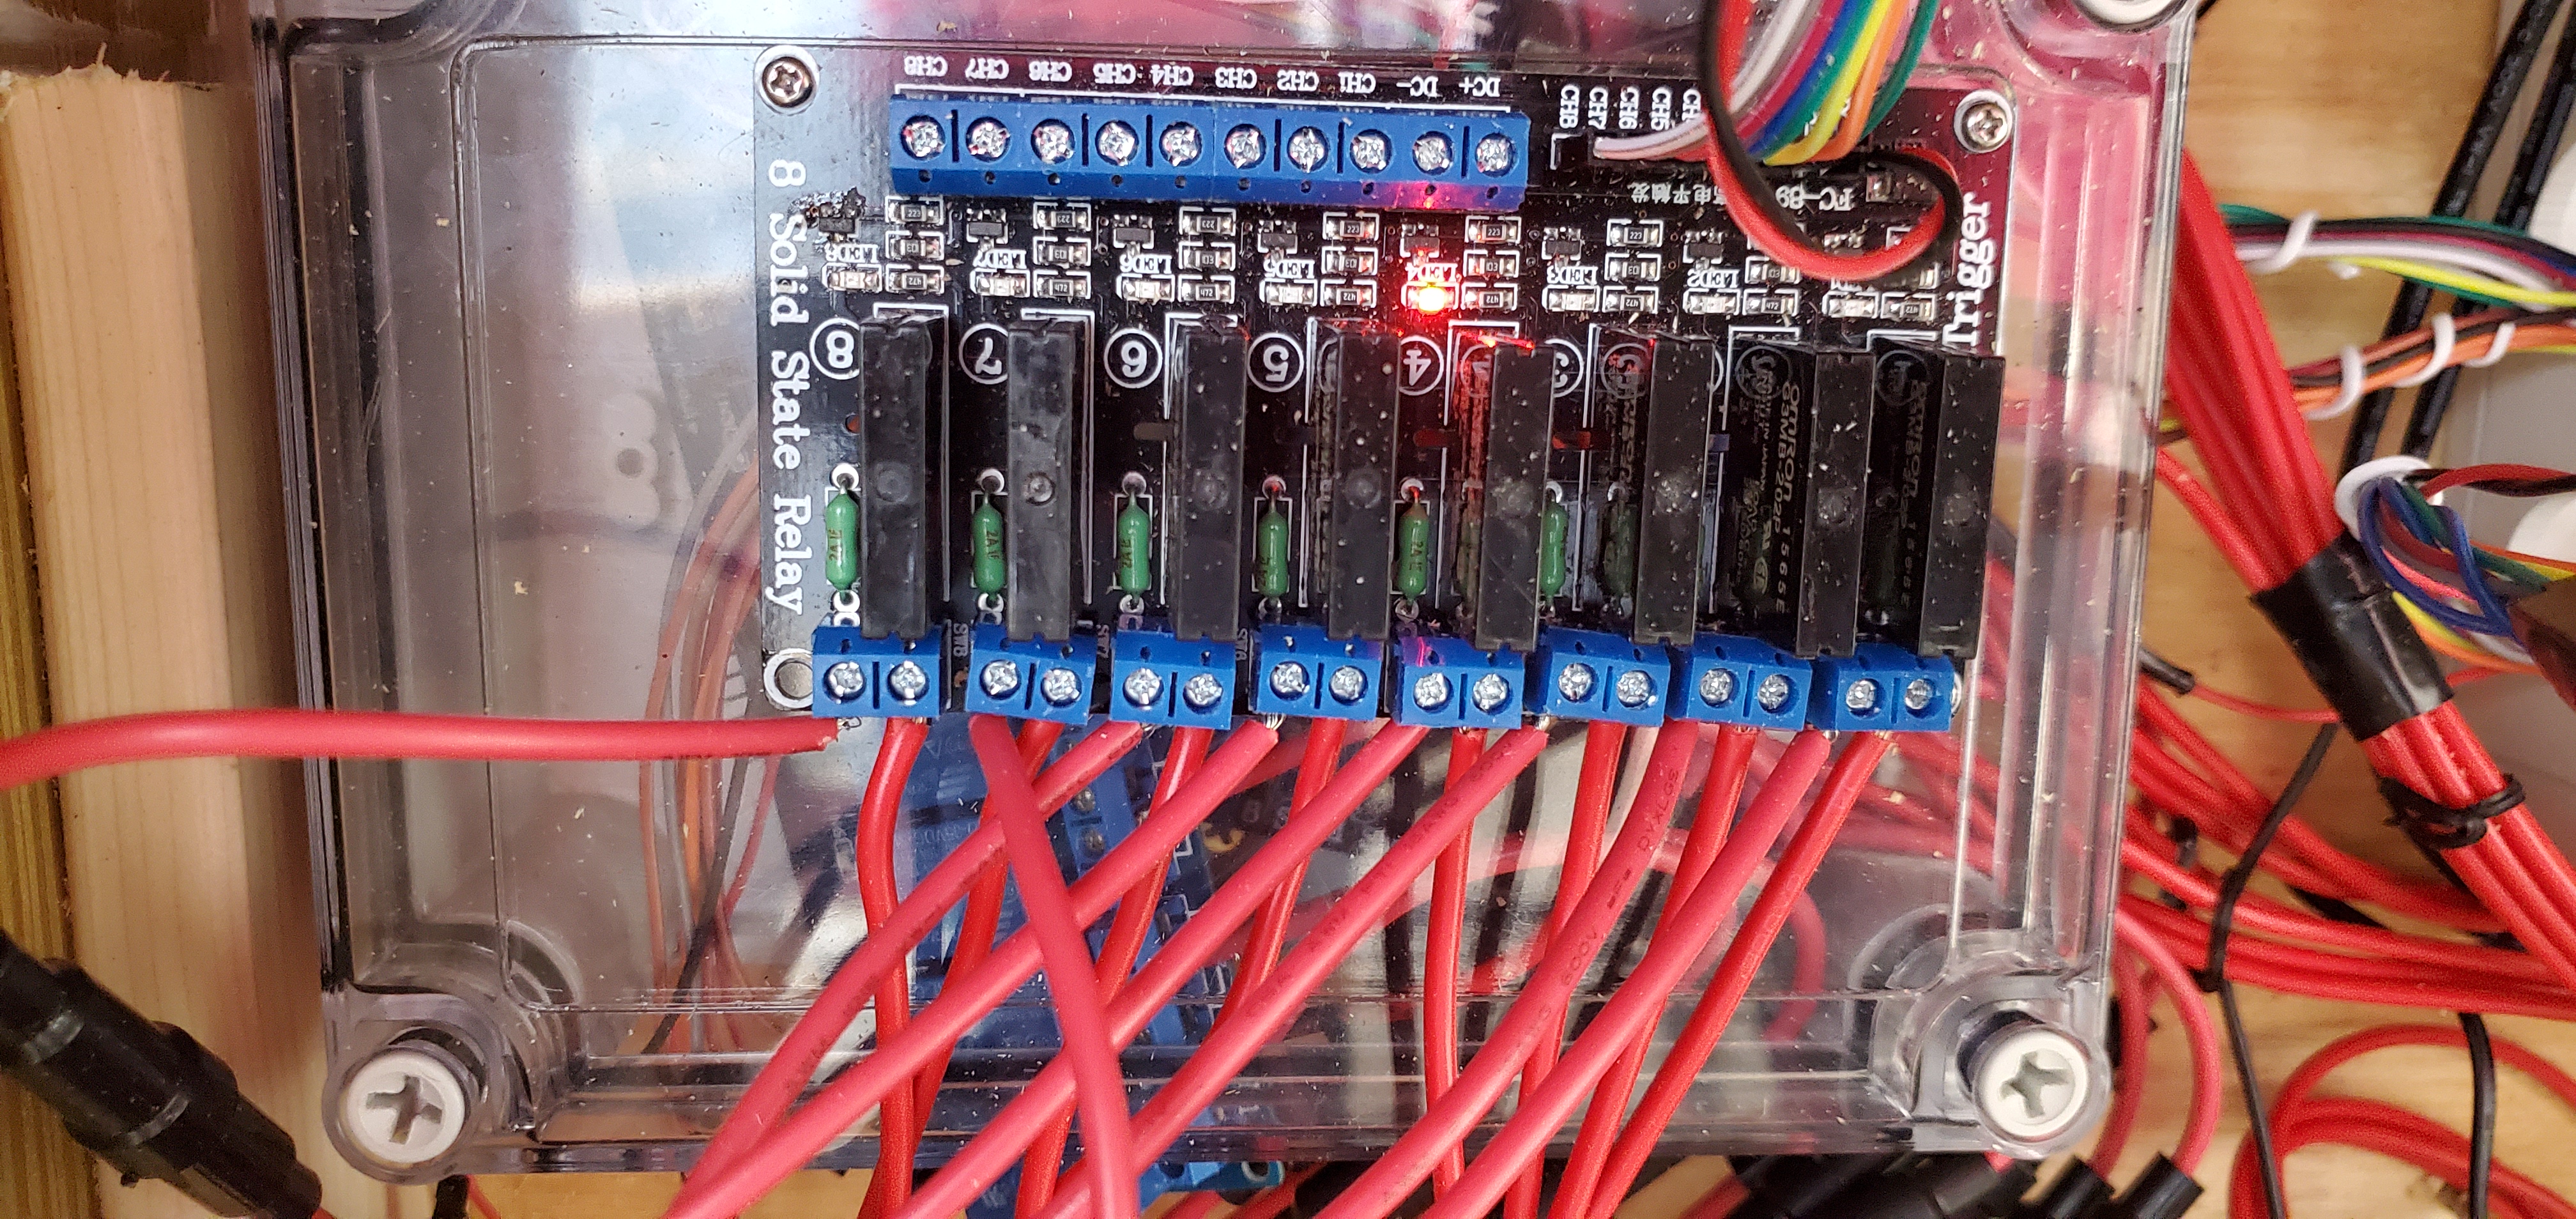 8-Channel Solid State Relay board